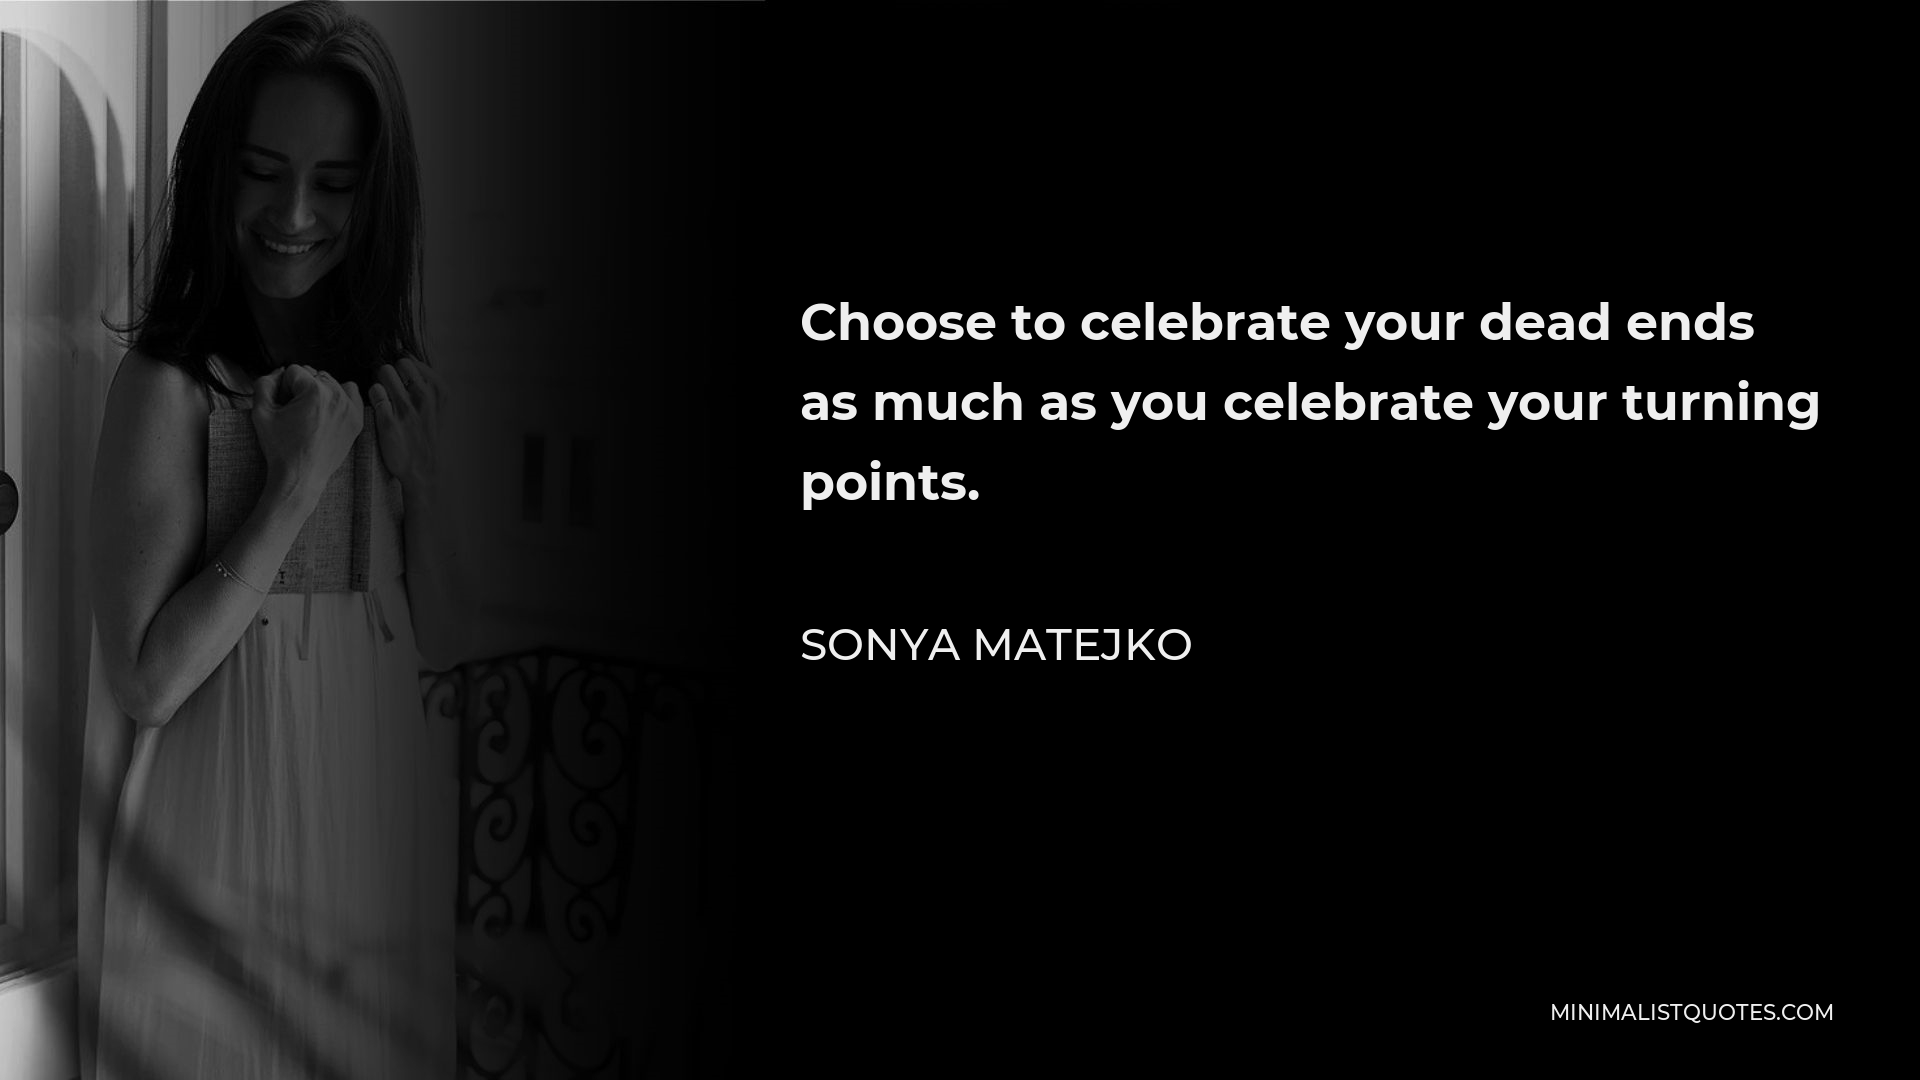 Sonya Matejko Quote - Choose to celebrate your dead ends as much as you celebrate your turning points.